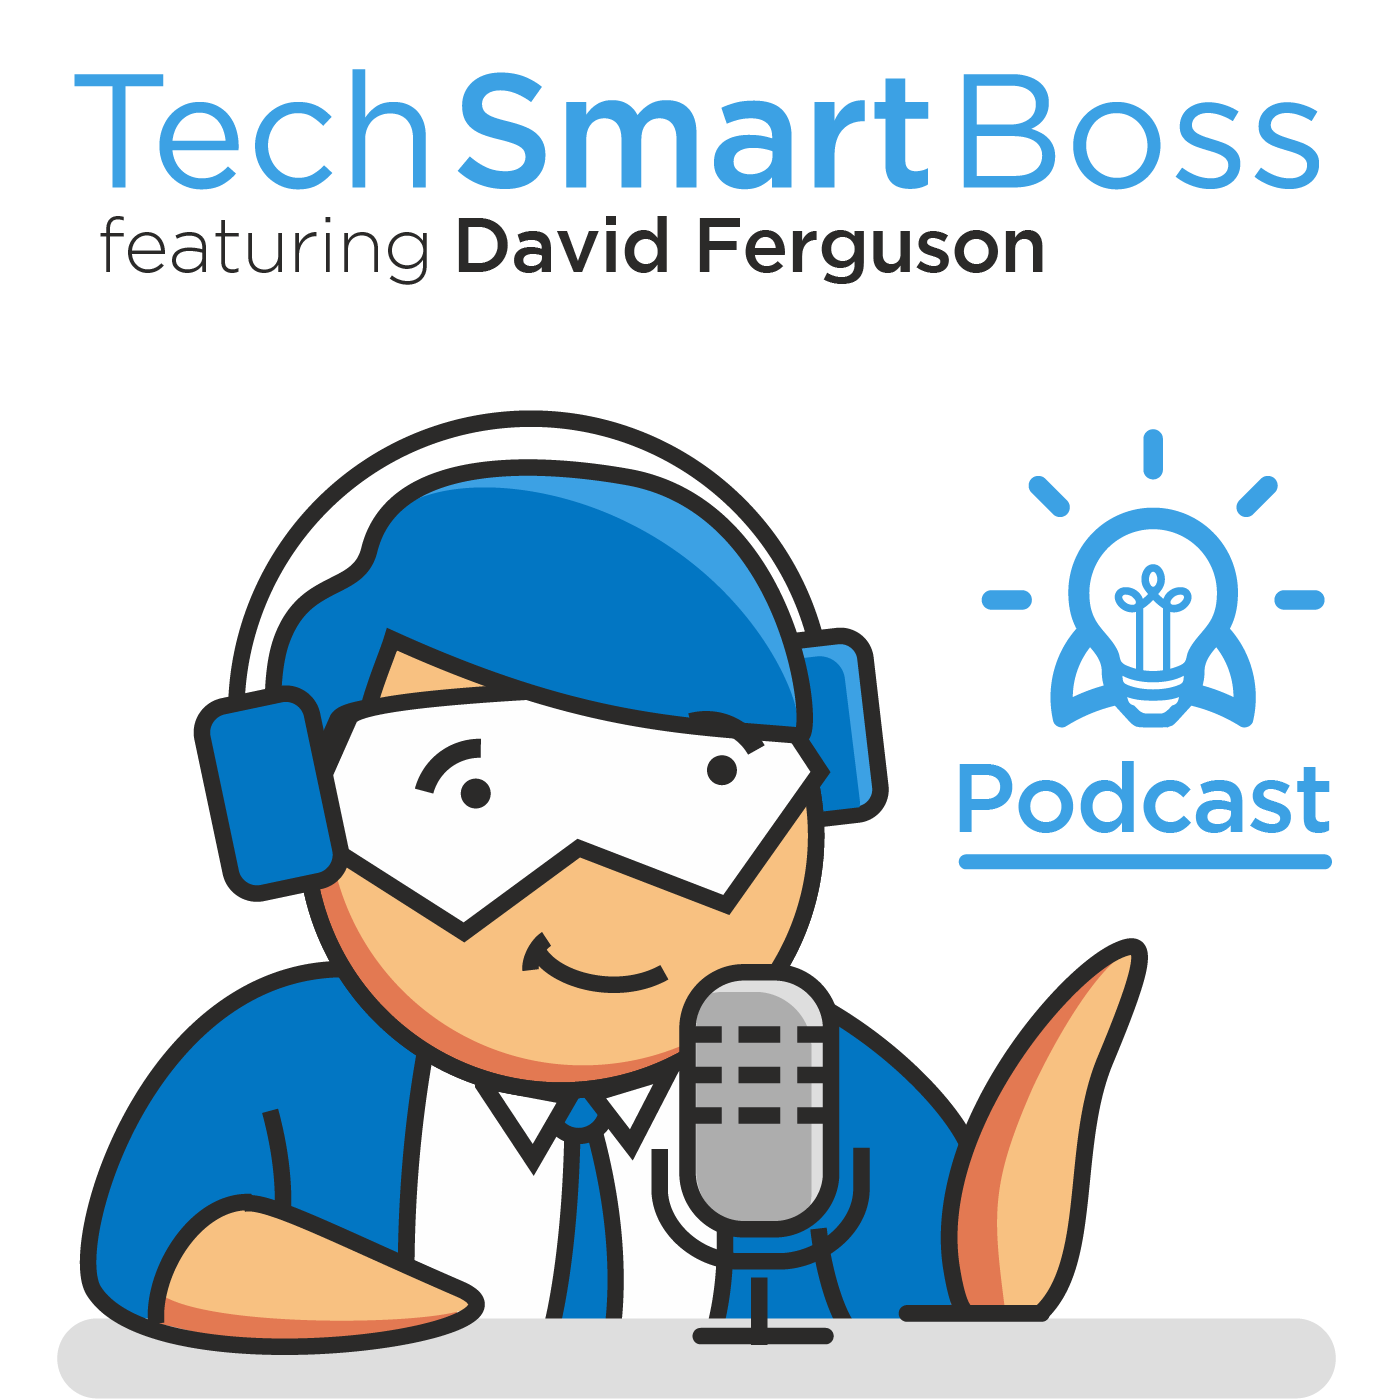 Episode 119: 7 Types of Software Your Sales Team Needs In Their Tech Stack